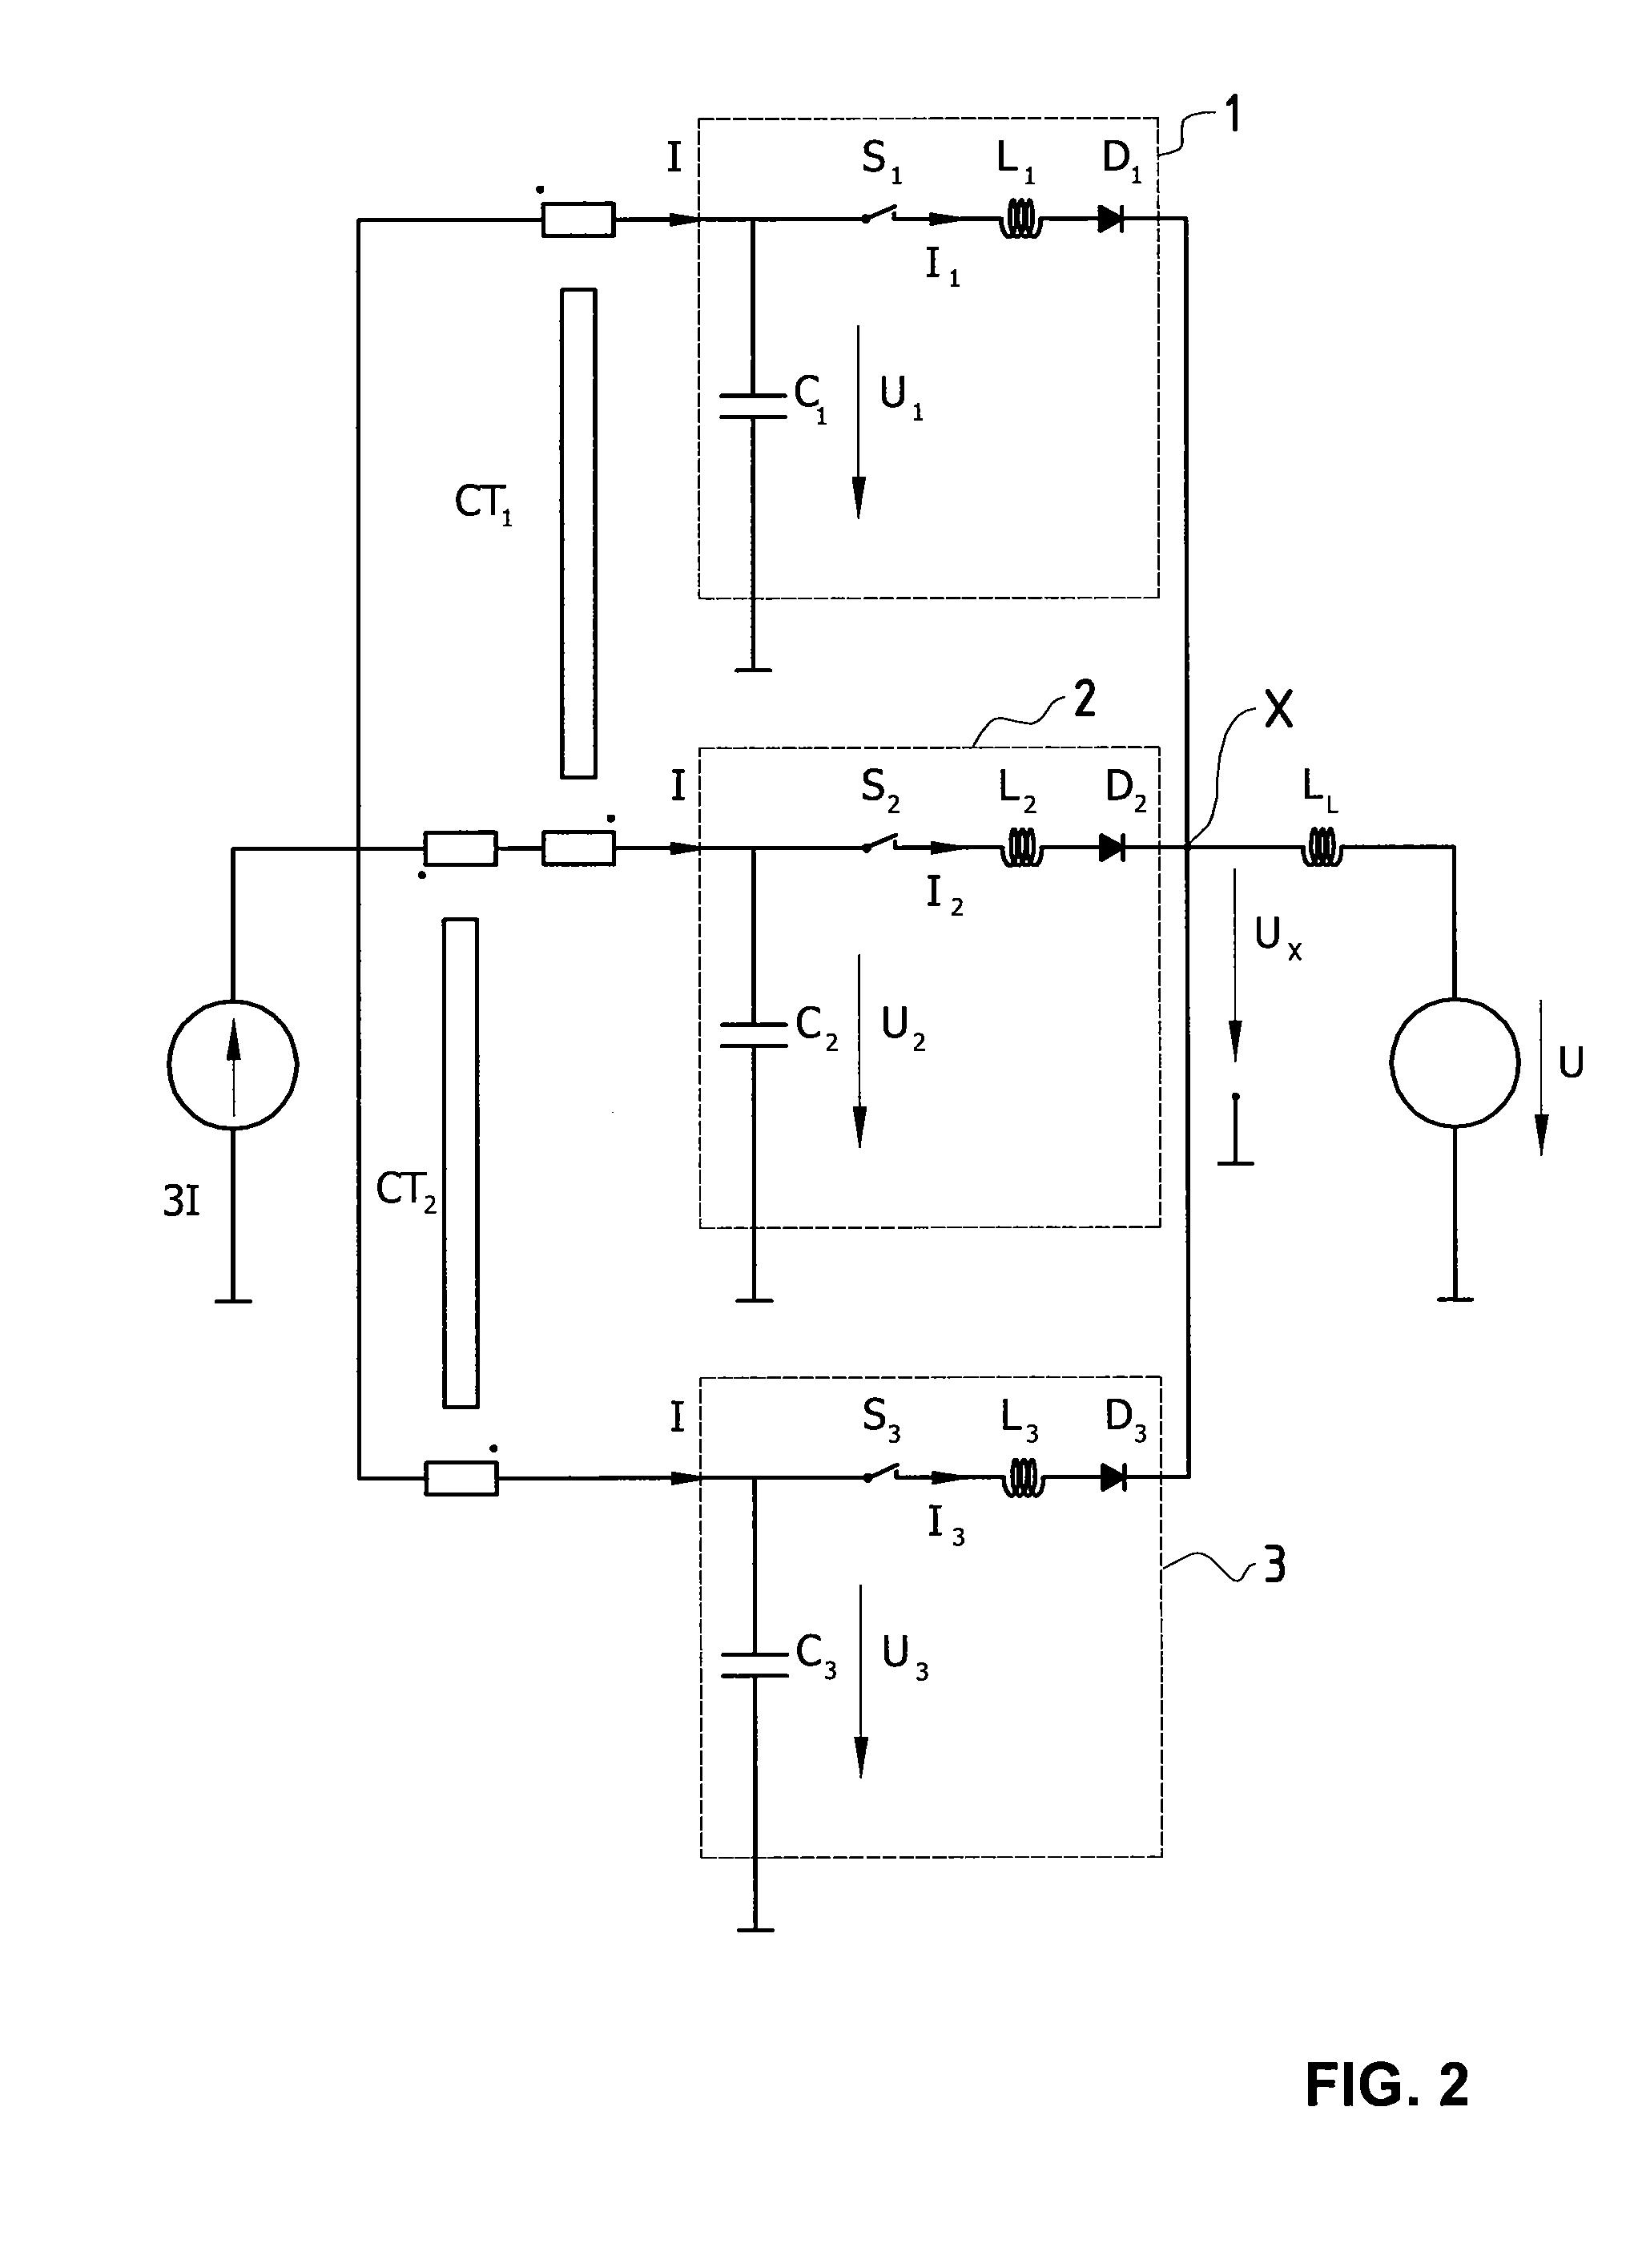 Multiphase soft-switched dc-dc converter